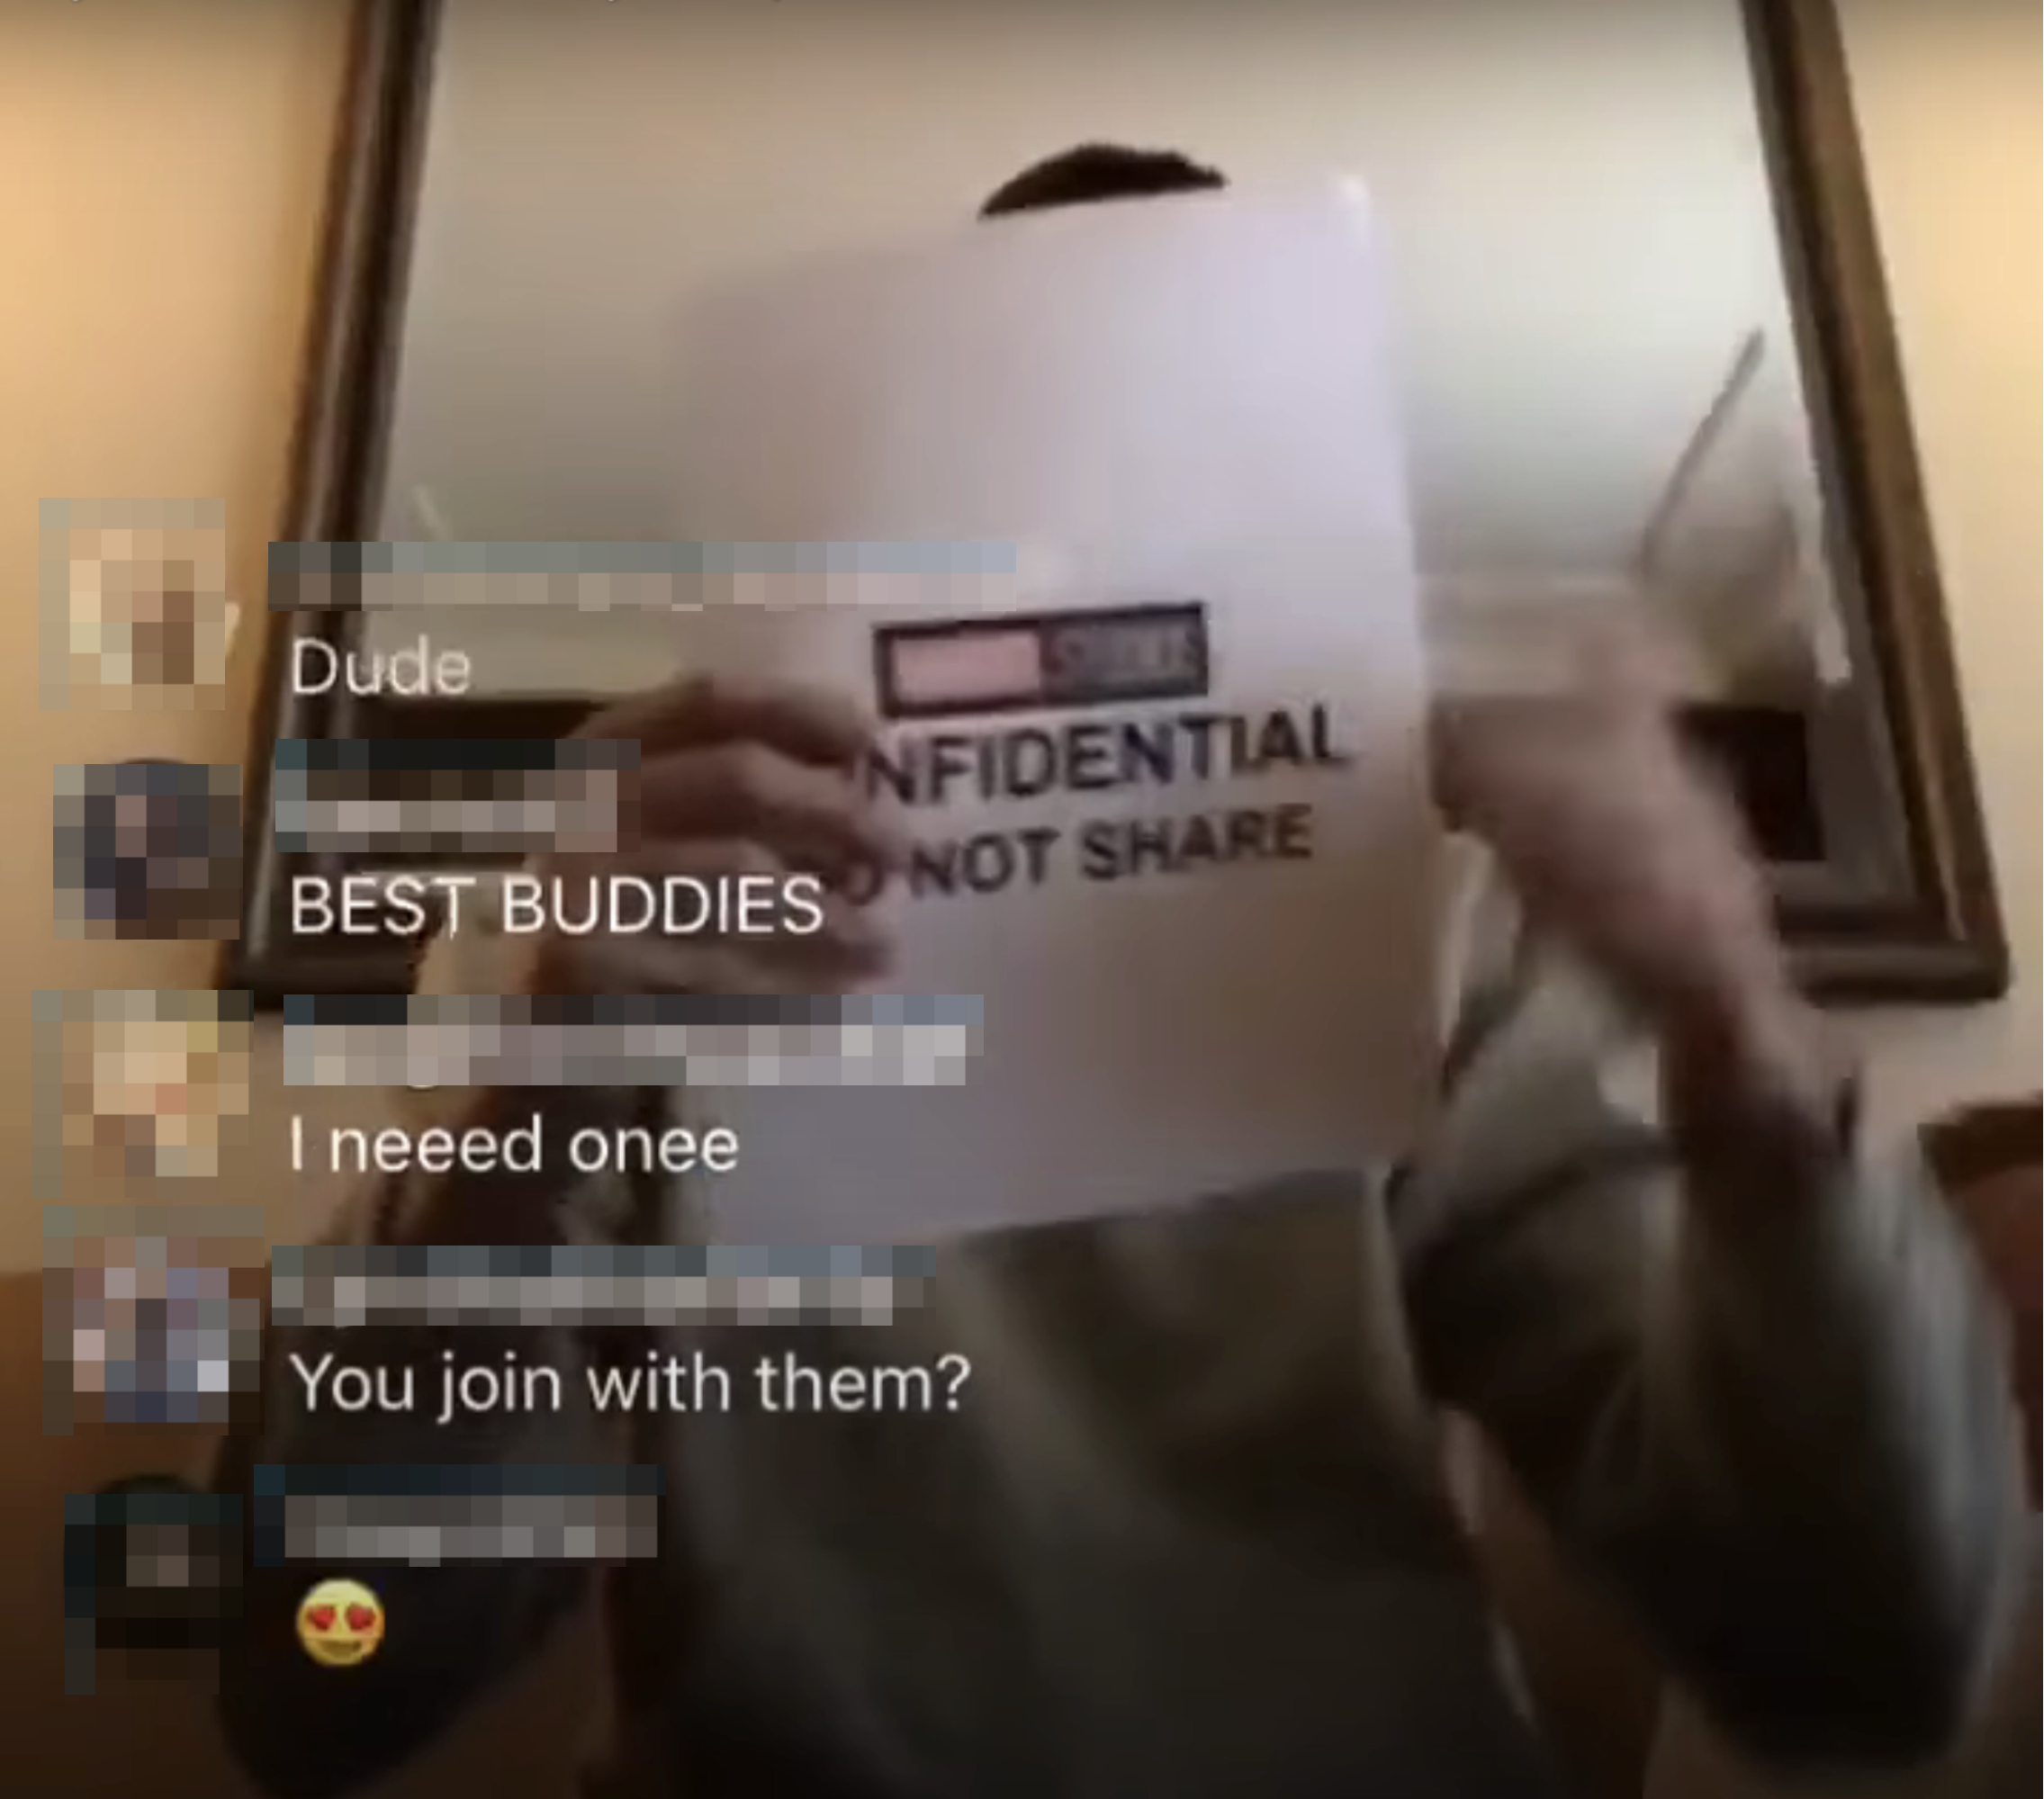 Tom holding a paper with &quot;CONFIDENTIAL DO NOT SHARE&quot; in front of his face, social media comments visible